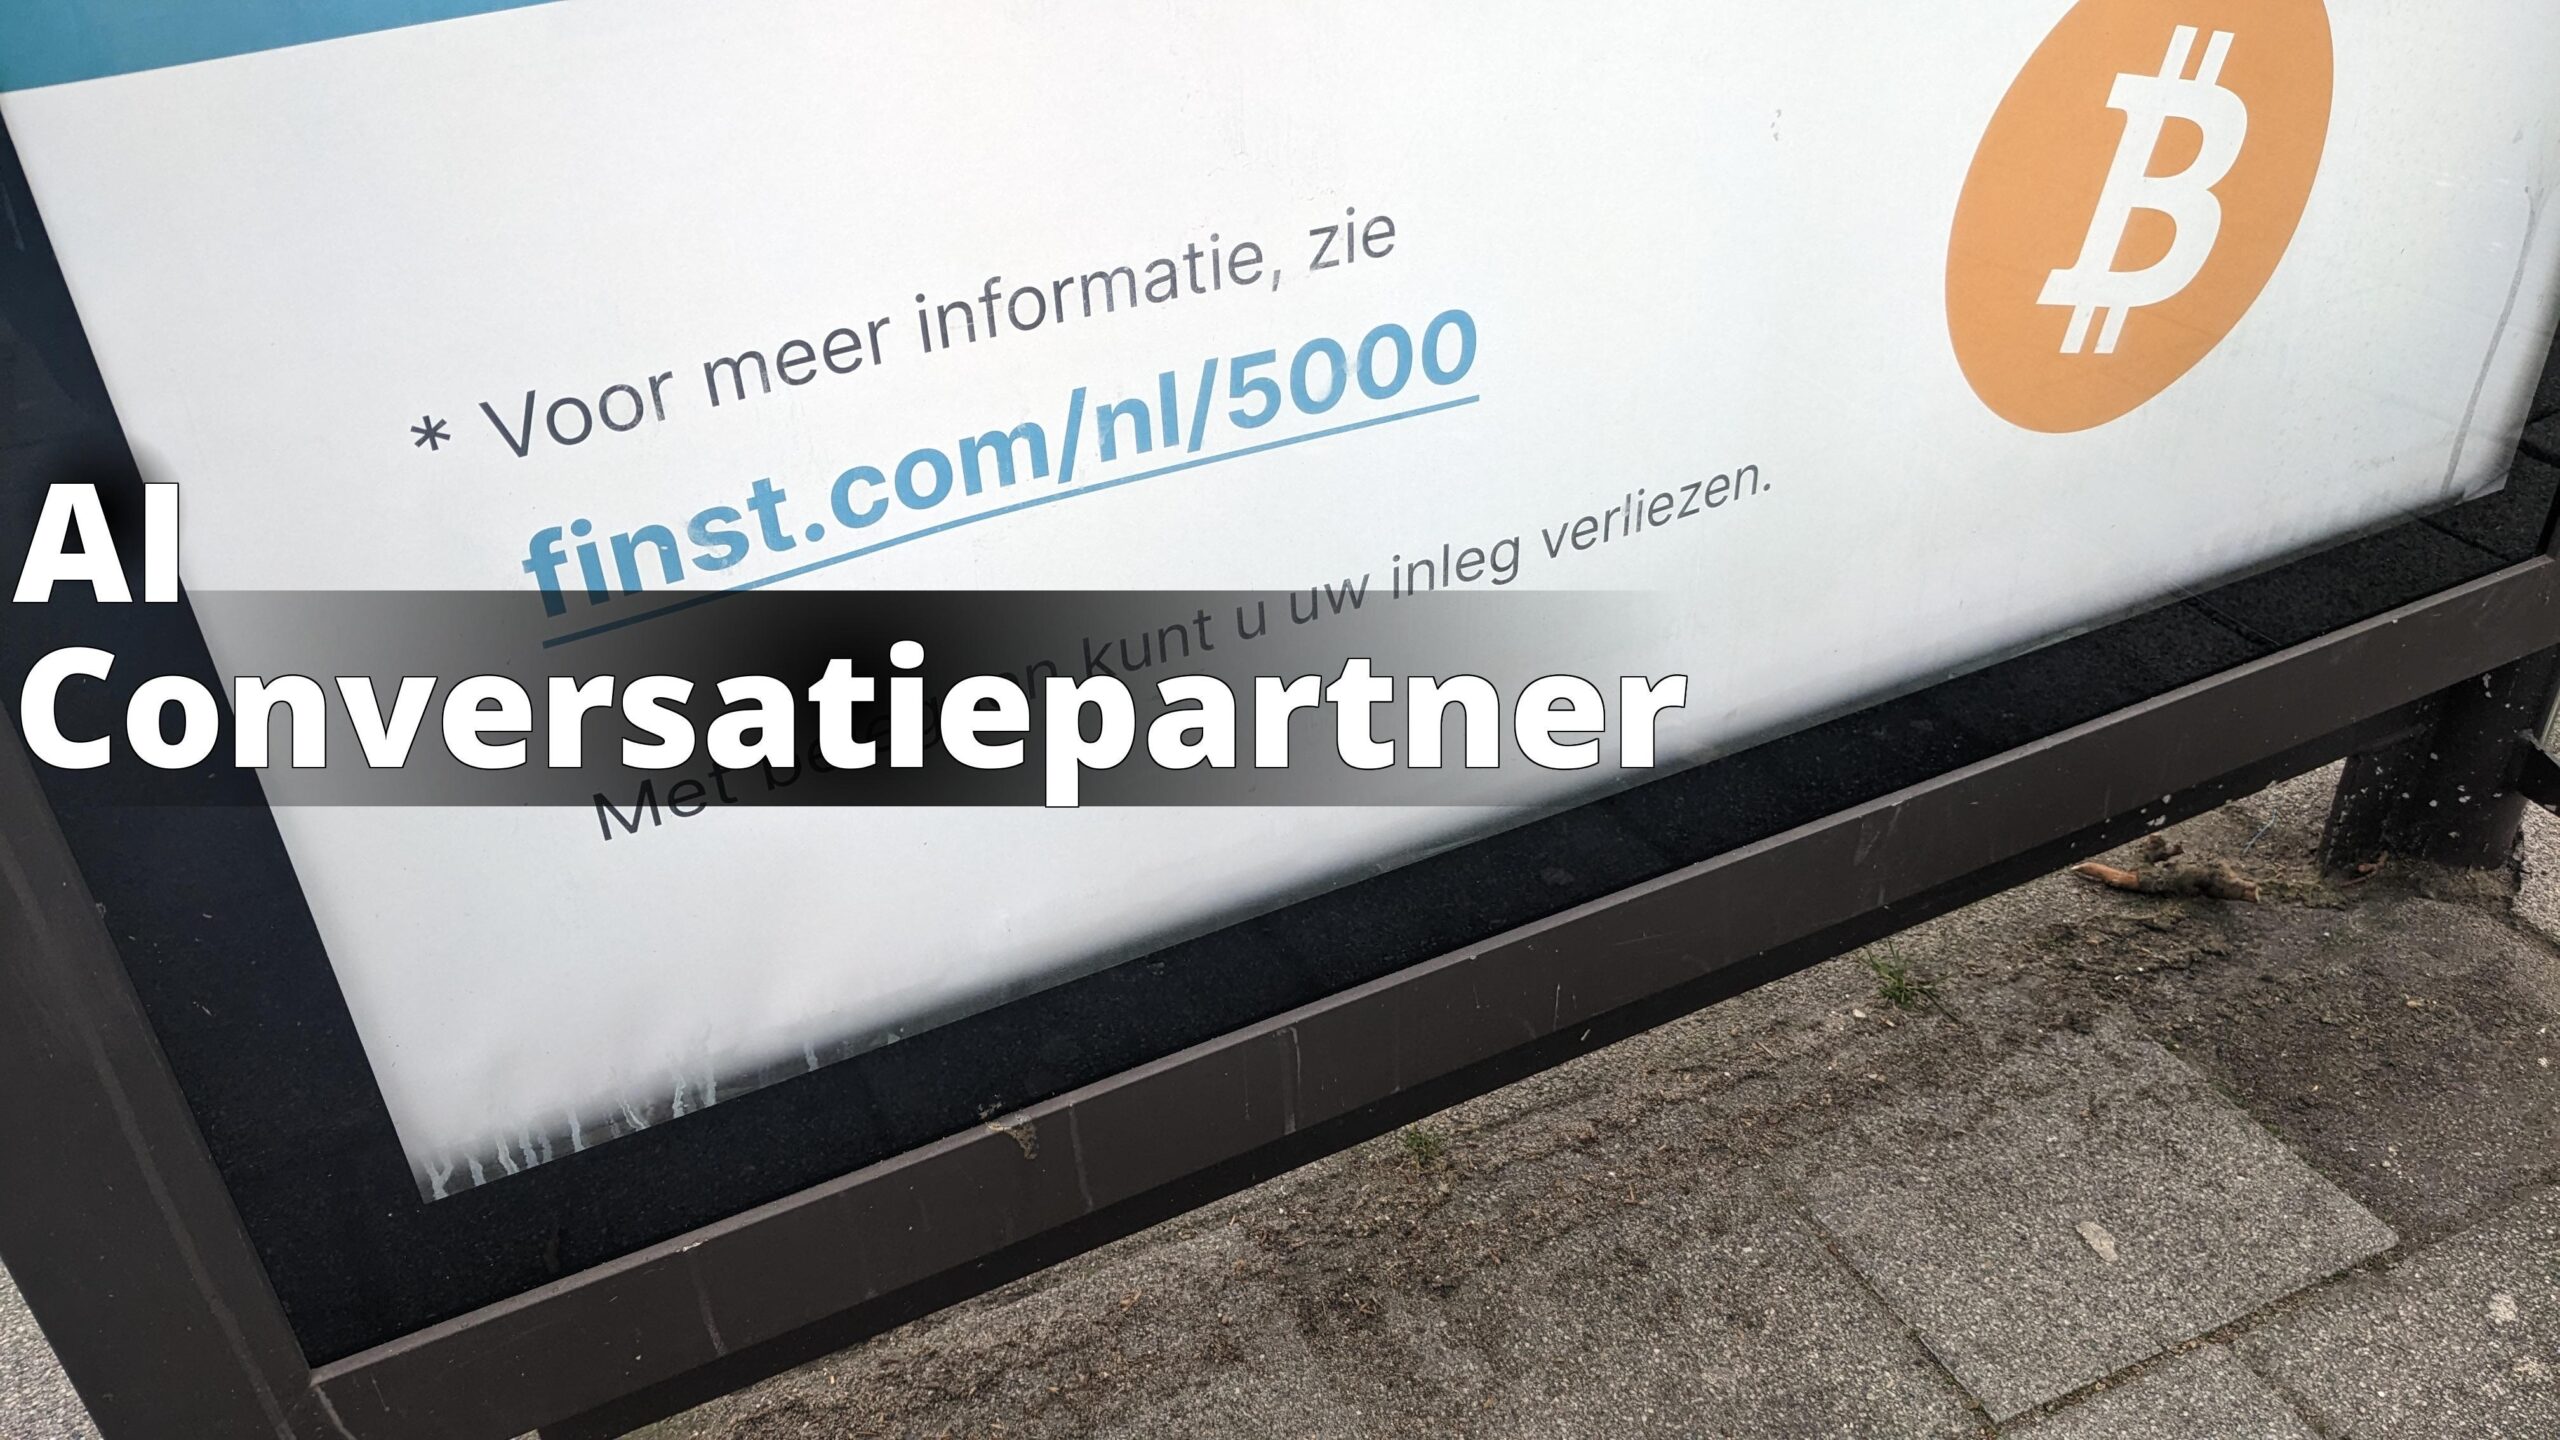 Finst cryptoplatform reclame, Molenlaankwartier, Rotterdam (2023) 02 - a sign that is on the side of